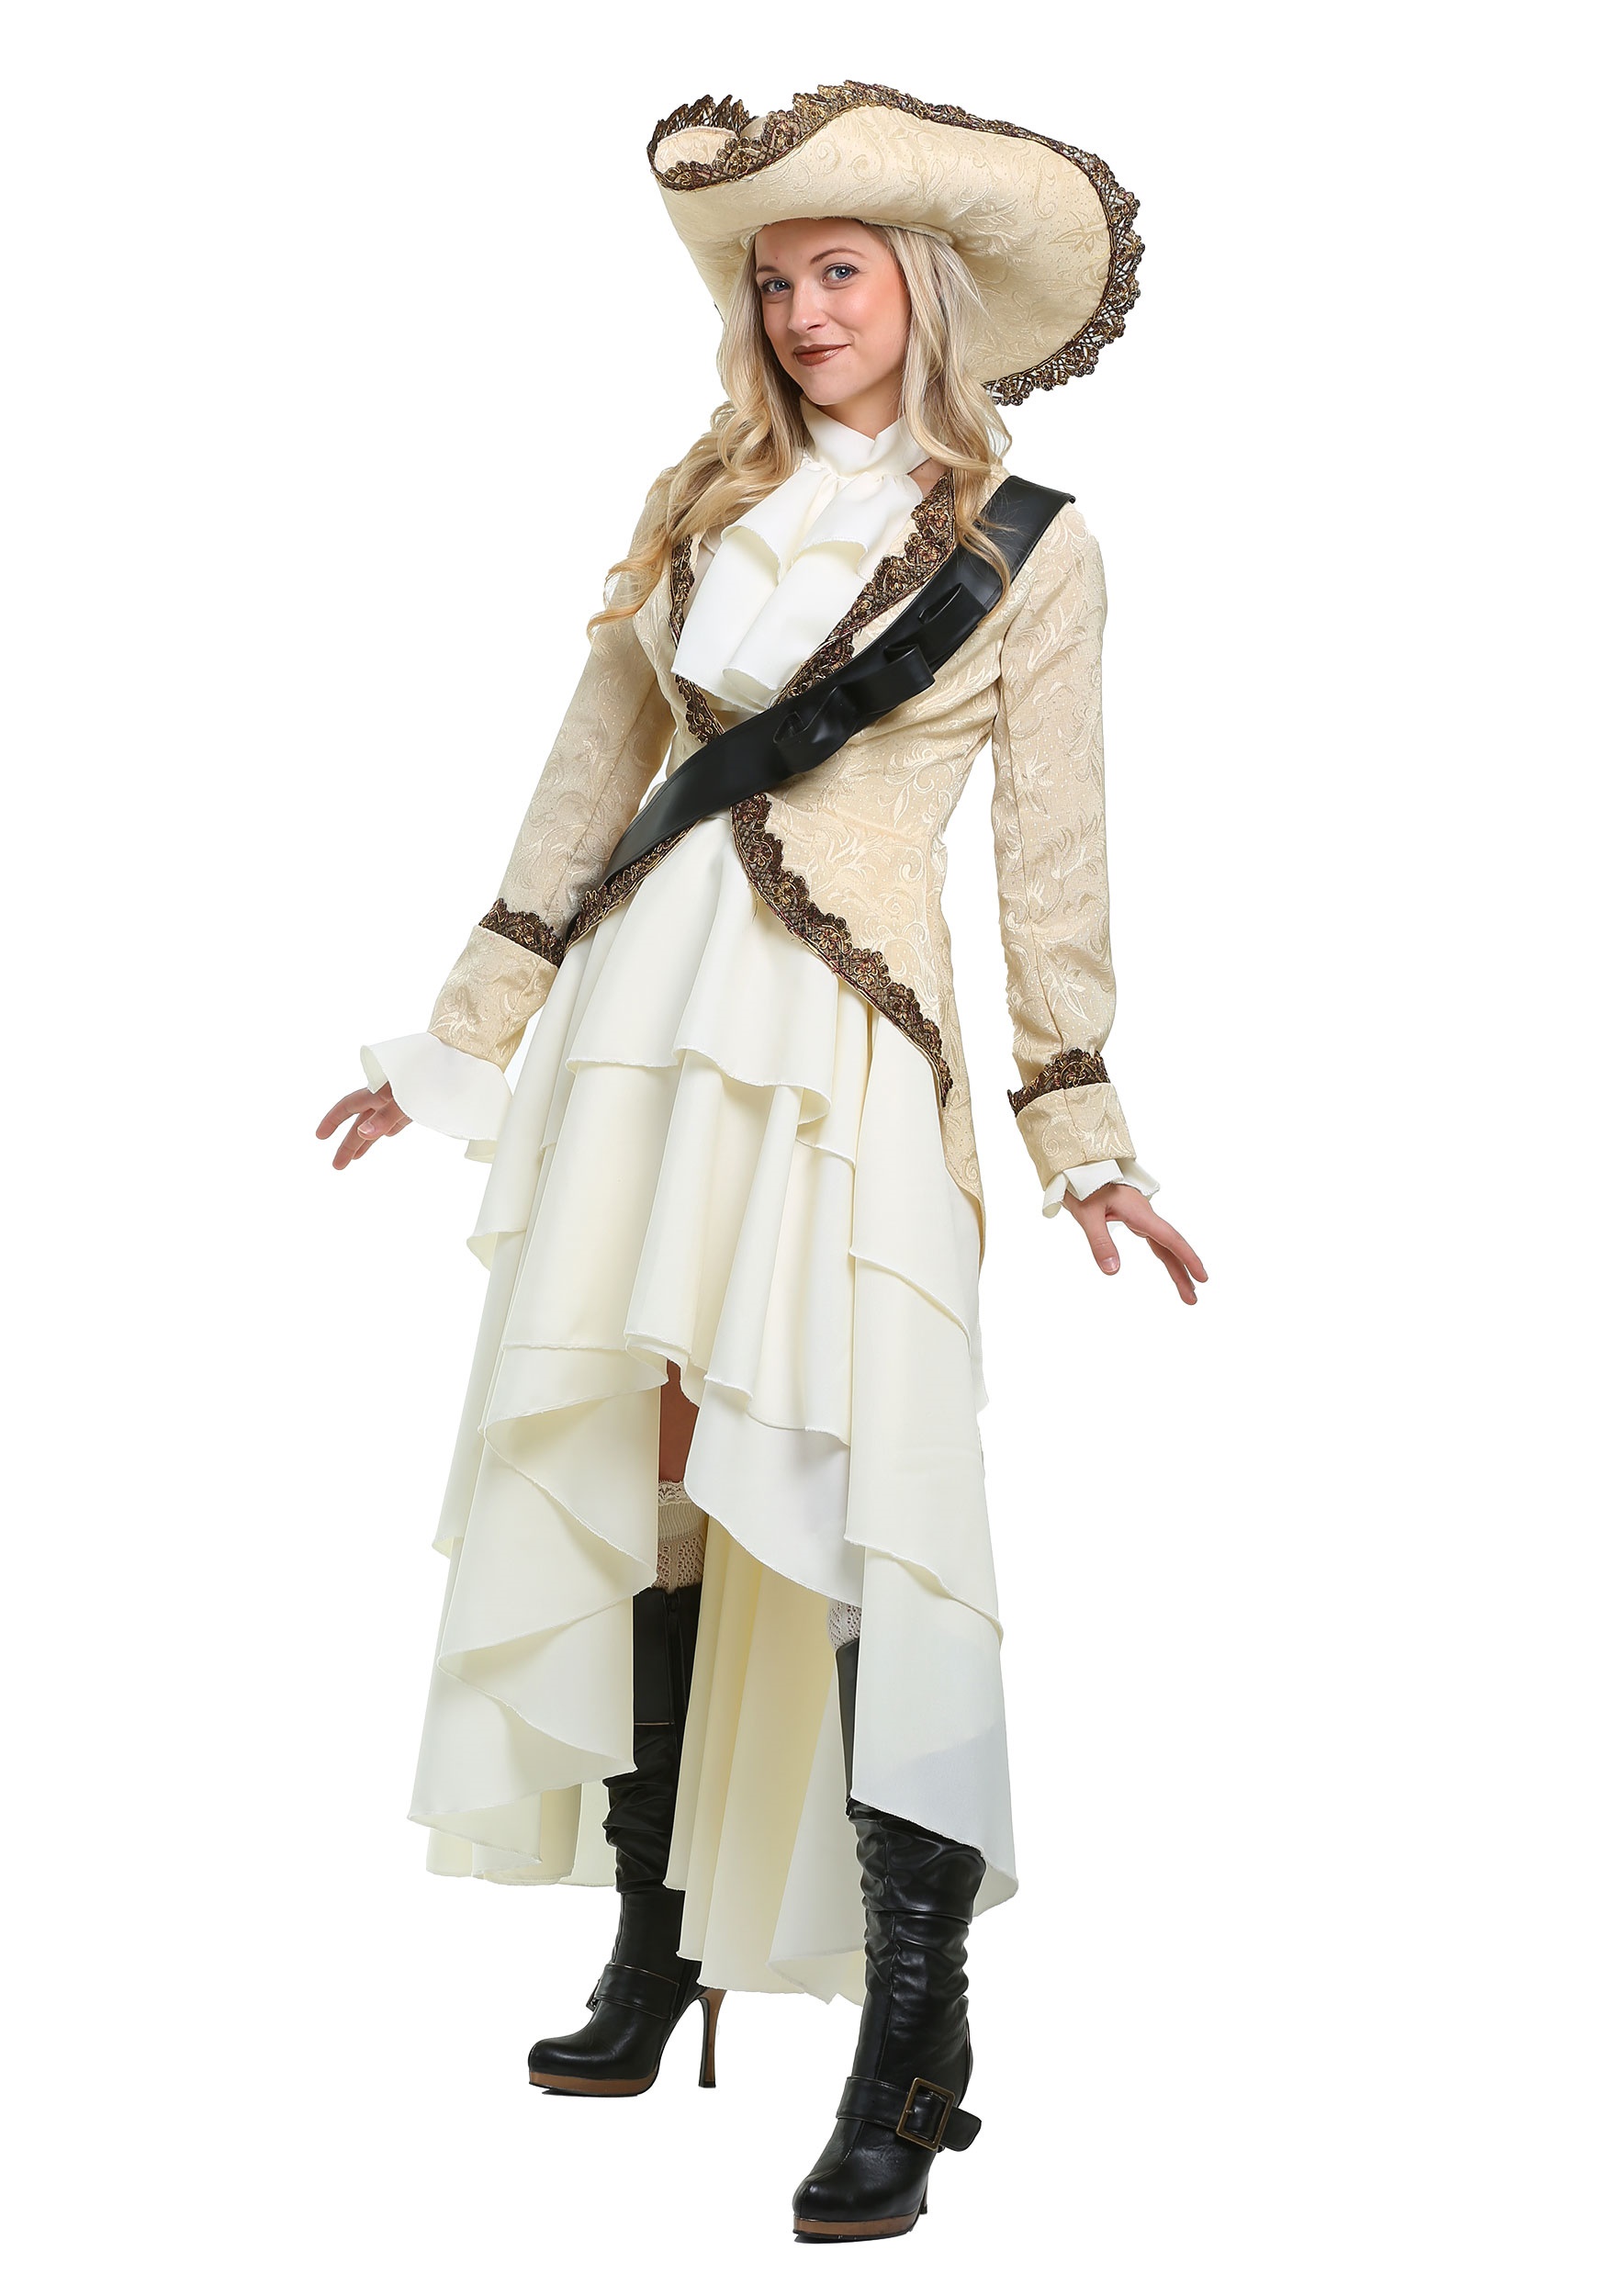 Captivating Pirate Plus Size Costume For Women , Pirate Costumes